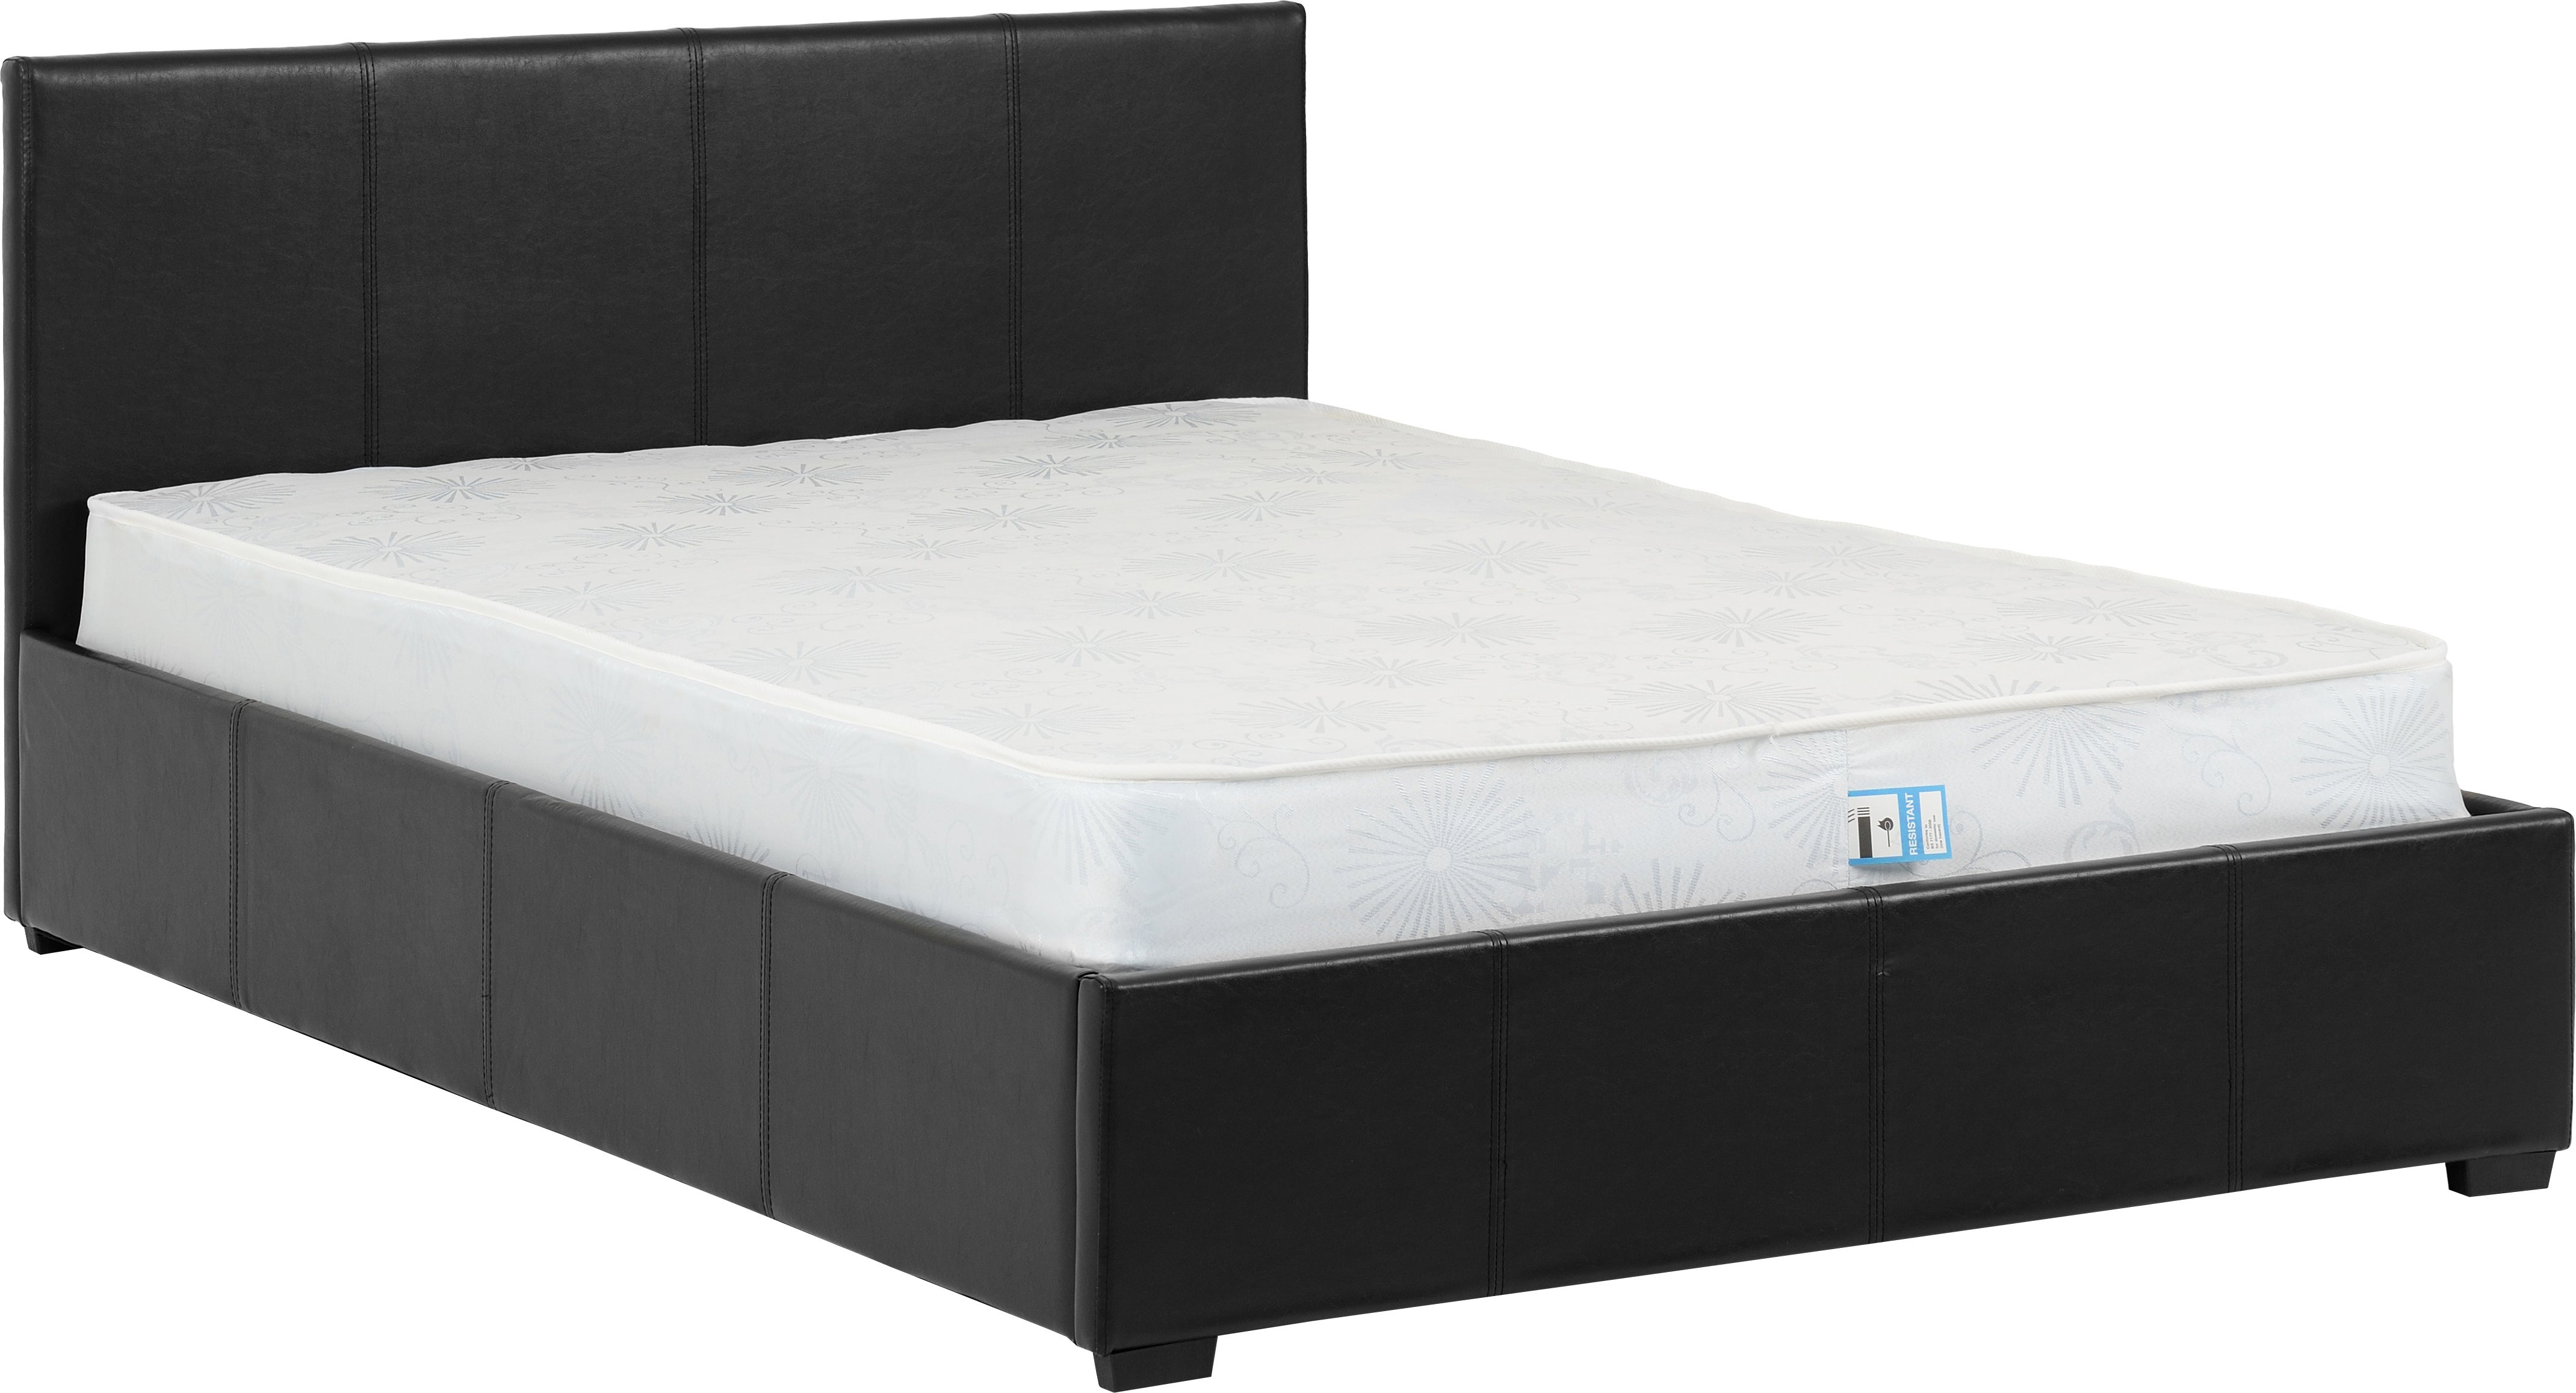 Waverley 4' Small Double Ottoman Storage Bed Frame